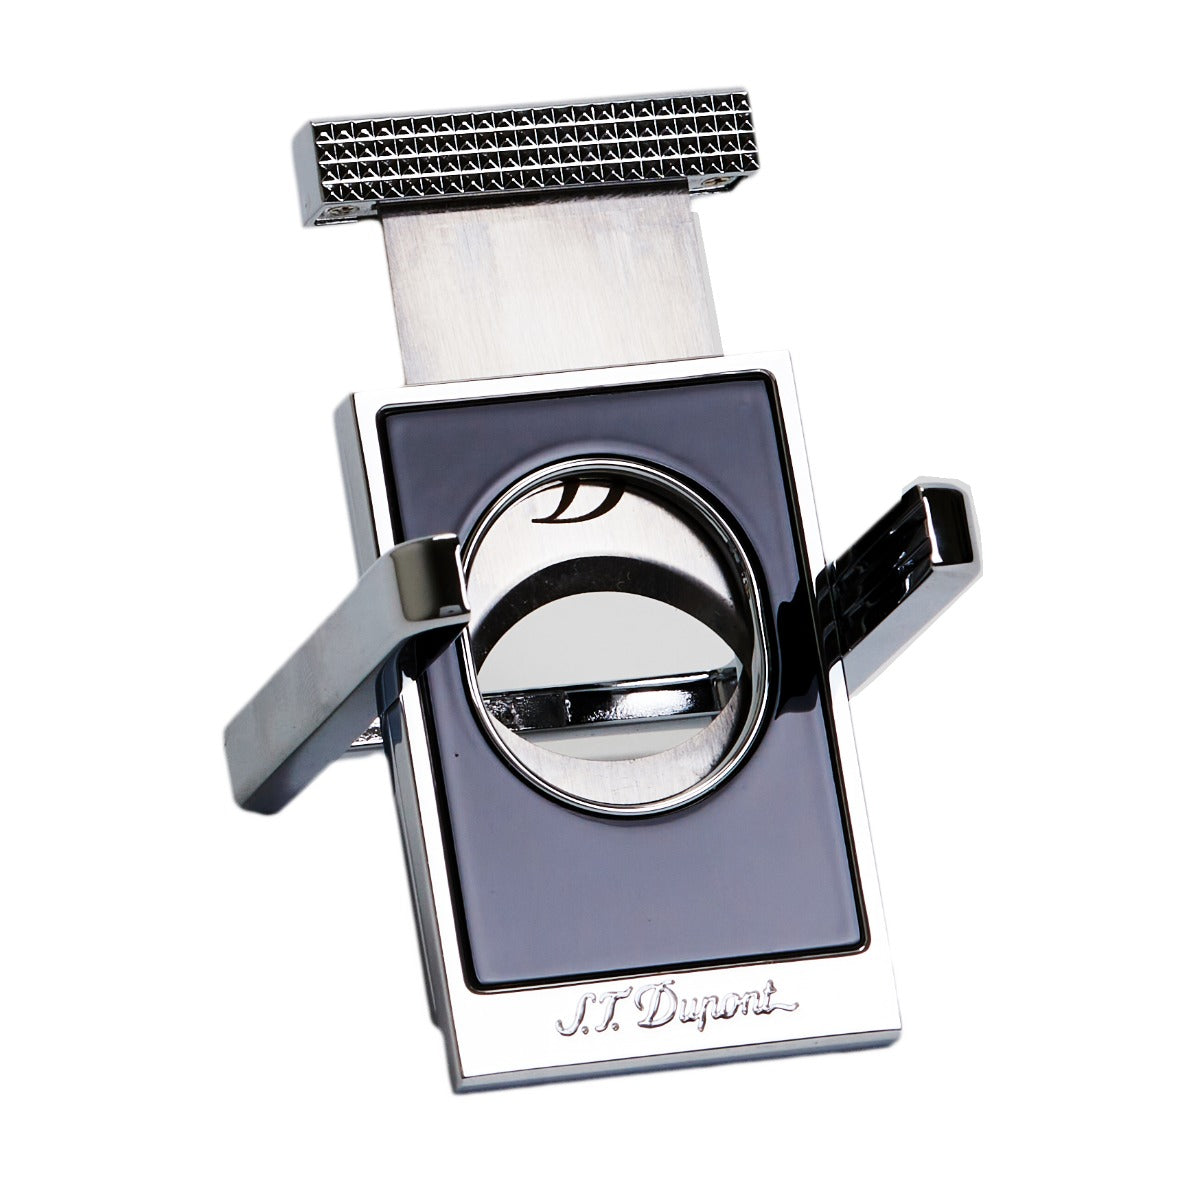 A S.T. Dupont Black & Chrome Cigar Cutter Stand with a silver stand.